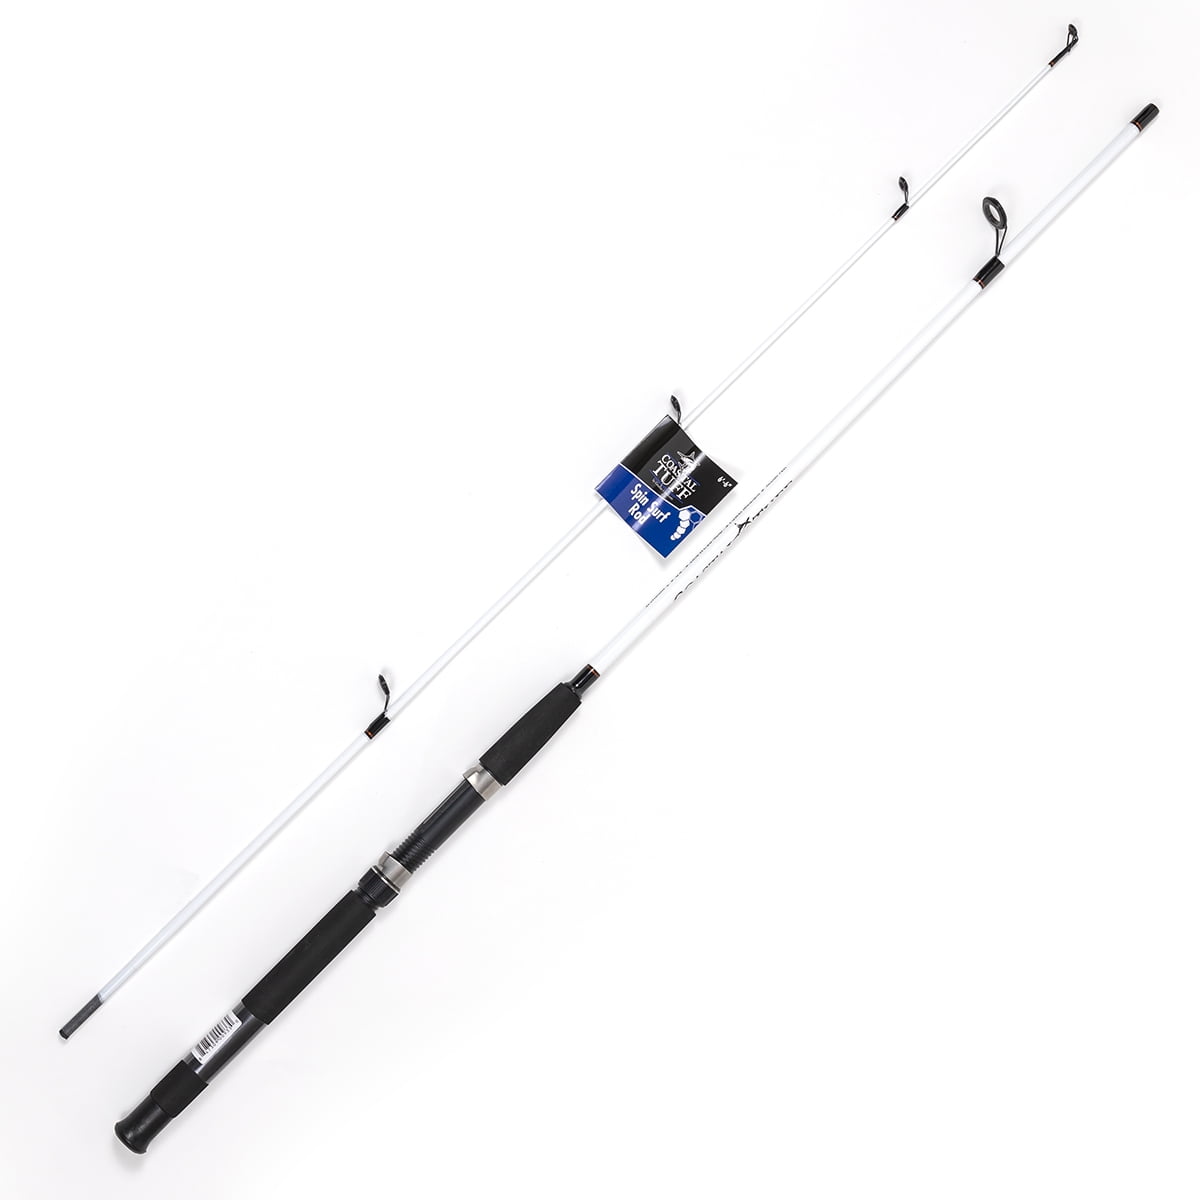  Tailored Tackle Surf Fishing Rod and Reel Combo 10 Foot Surf  Rod Heavy Surfcasting Power Moderate Fast Action Tip 7000 Size XL Surf Fishing  Reel Saltwater Resistant Guides : Sports & Outdoors